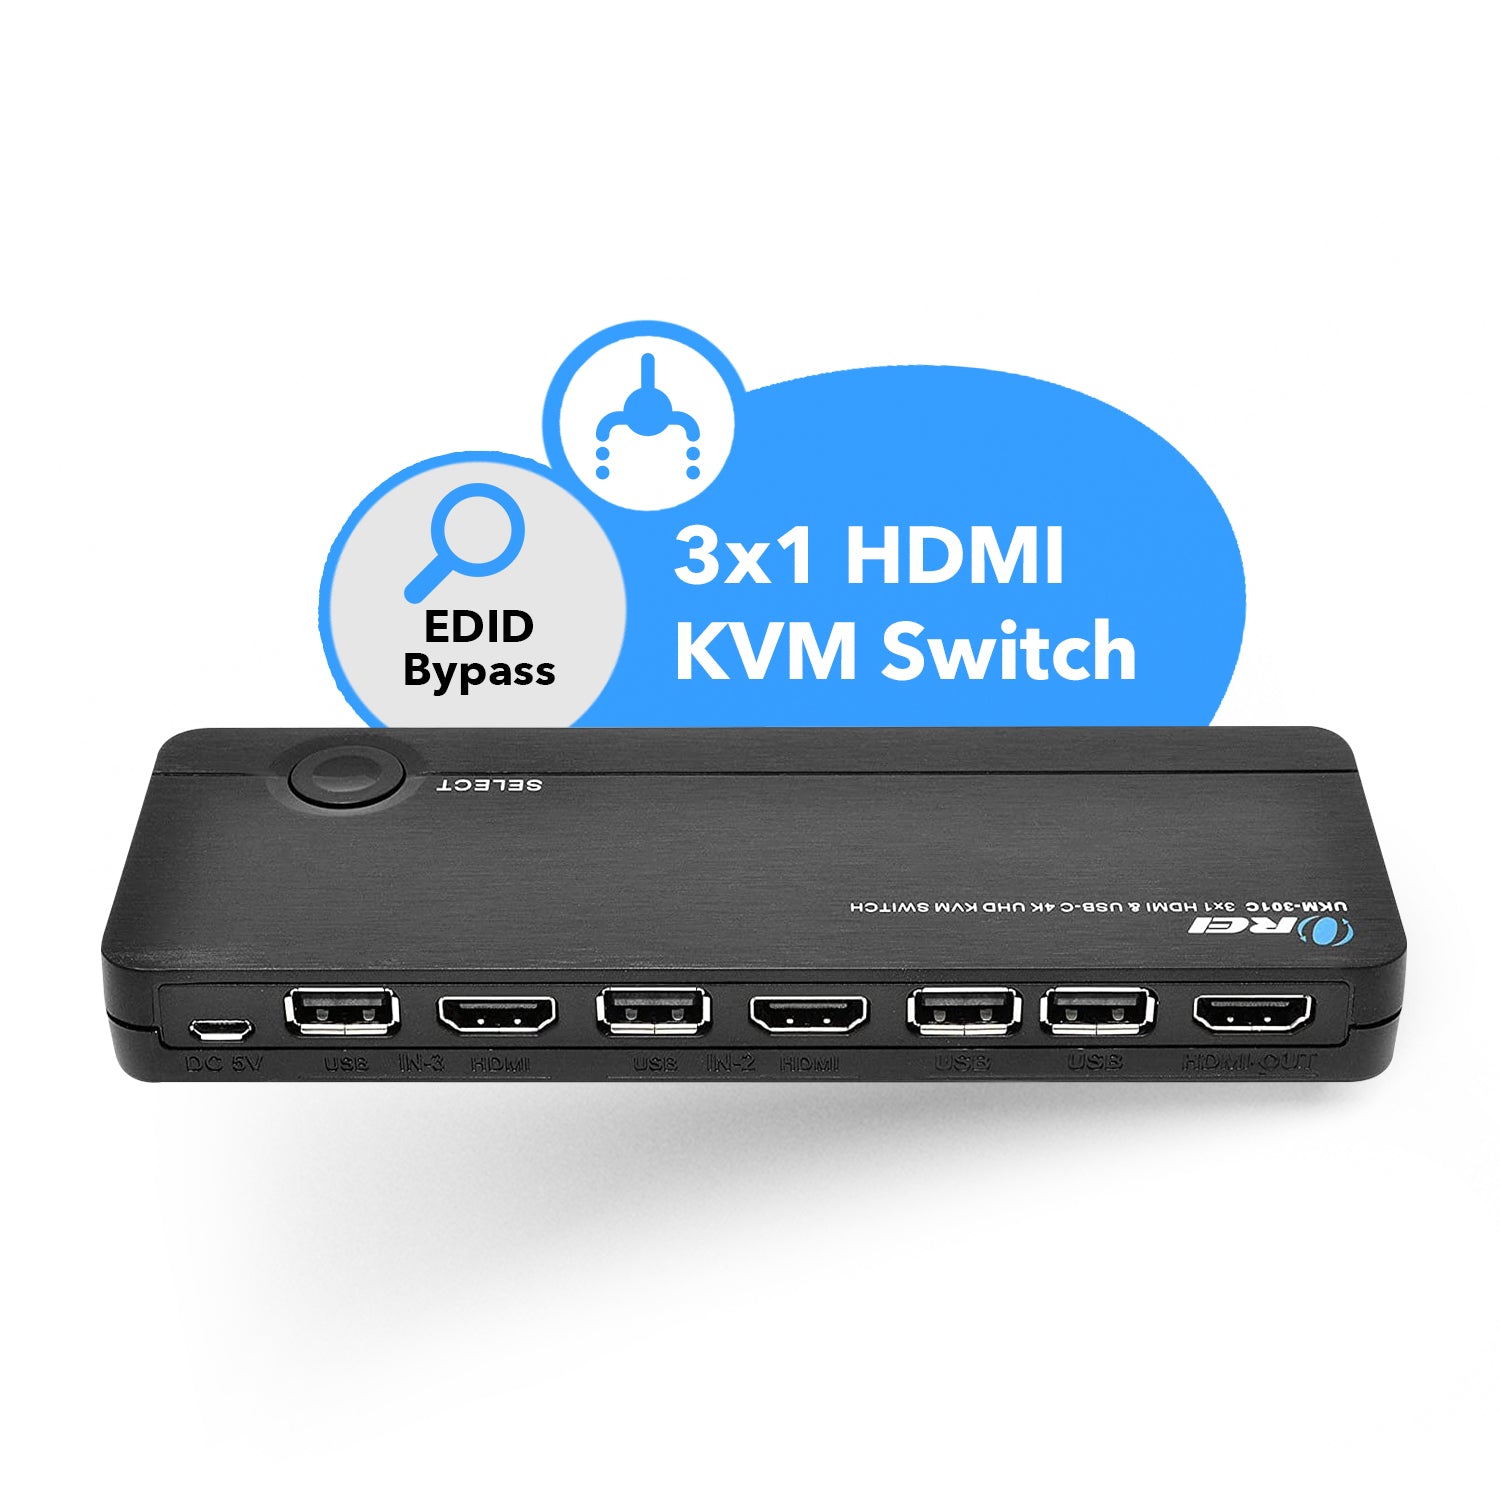 KVM Switch, KVM Switch HDTV, USB KVM Switch For 2 Computers Sharing One HD  Monitor And Keyboard Mouse, Support 4K@60Hz, 2 HDTV Cables And 2 USB Cables